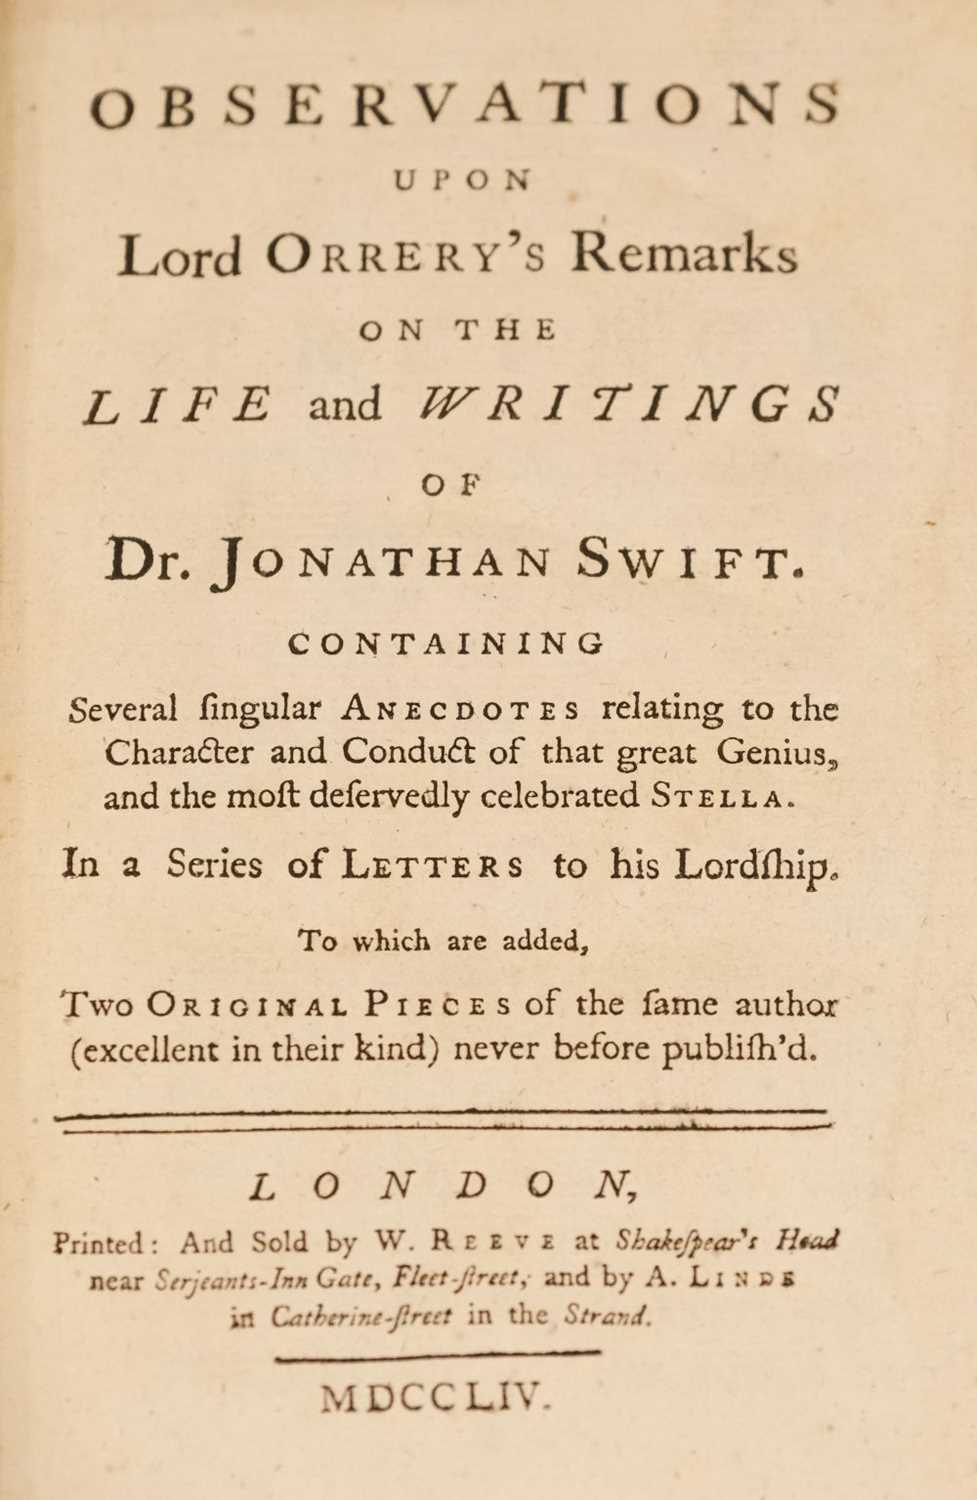 Lot 294 - Delany (Patrick). Observations upon Lord Orrery's Remarks on ... Dr. Jonathan Swift , 1754